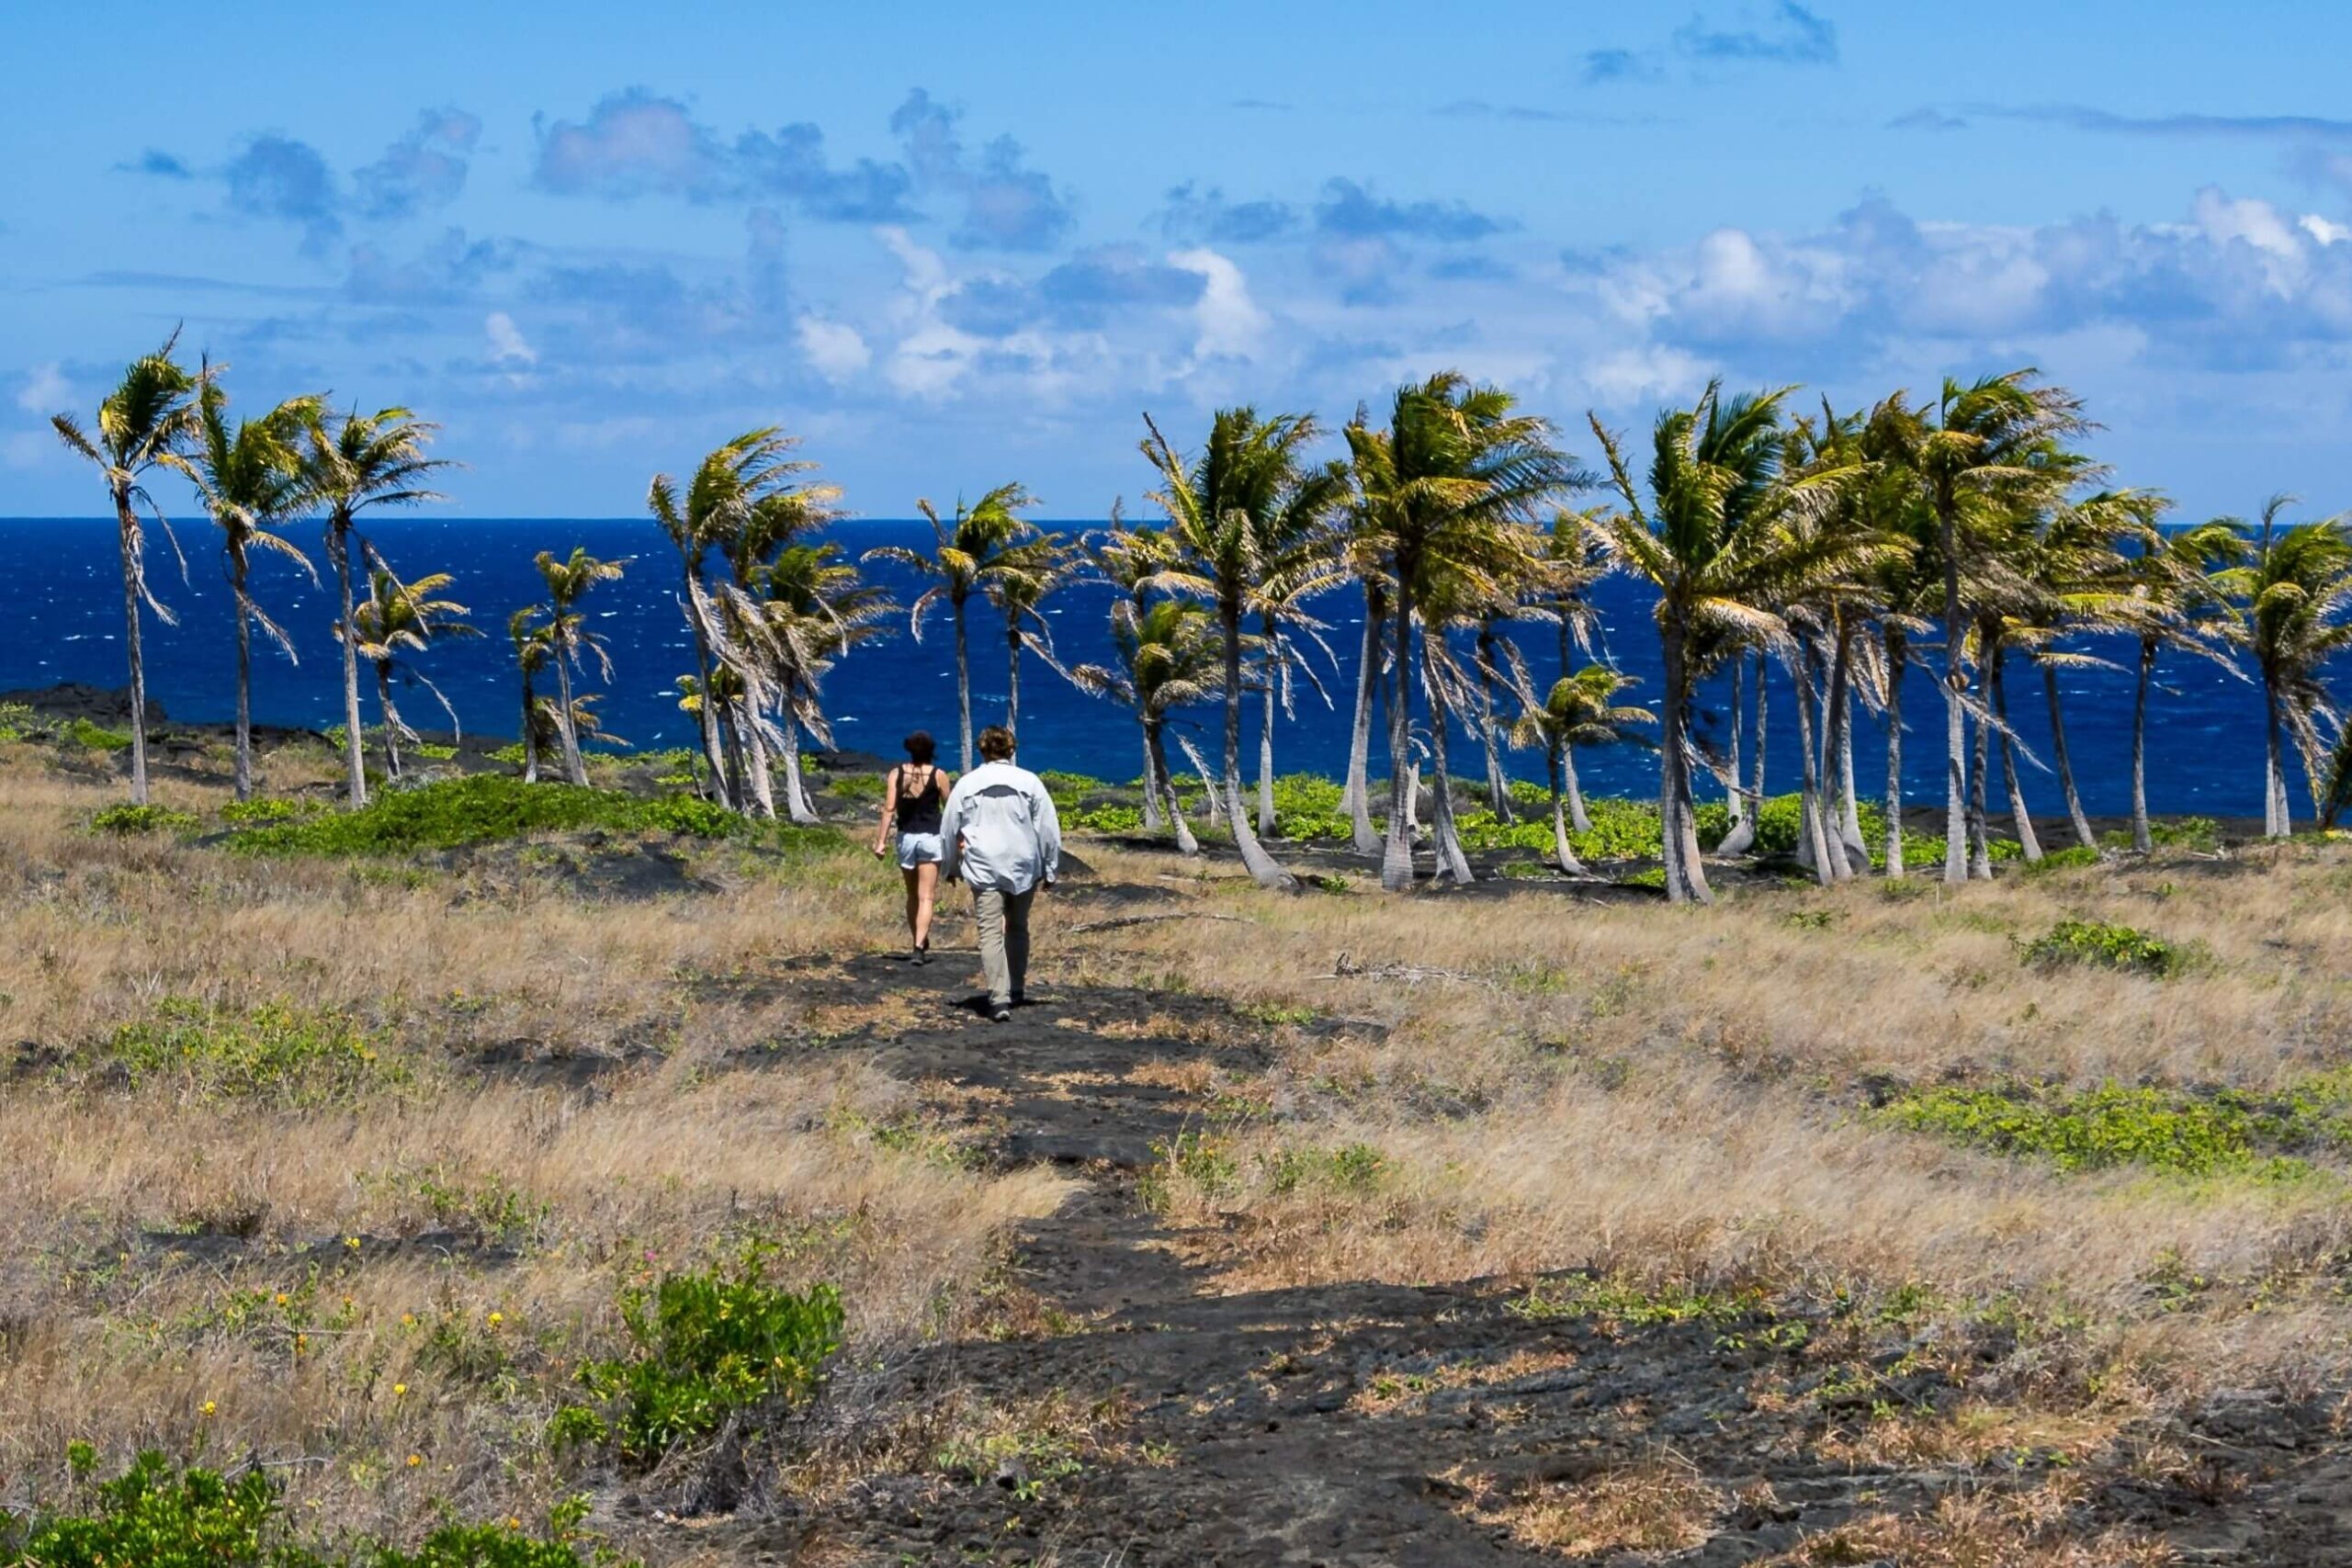 People walking near Chain Of Craters Road Hawaii.